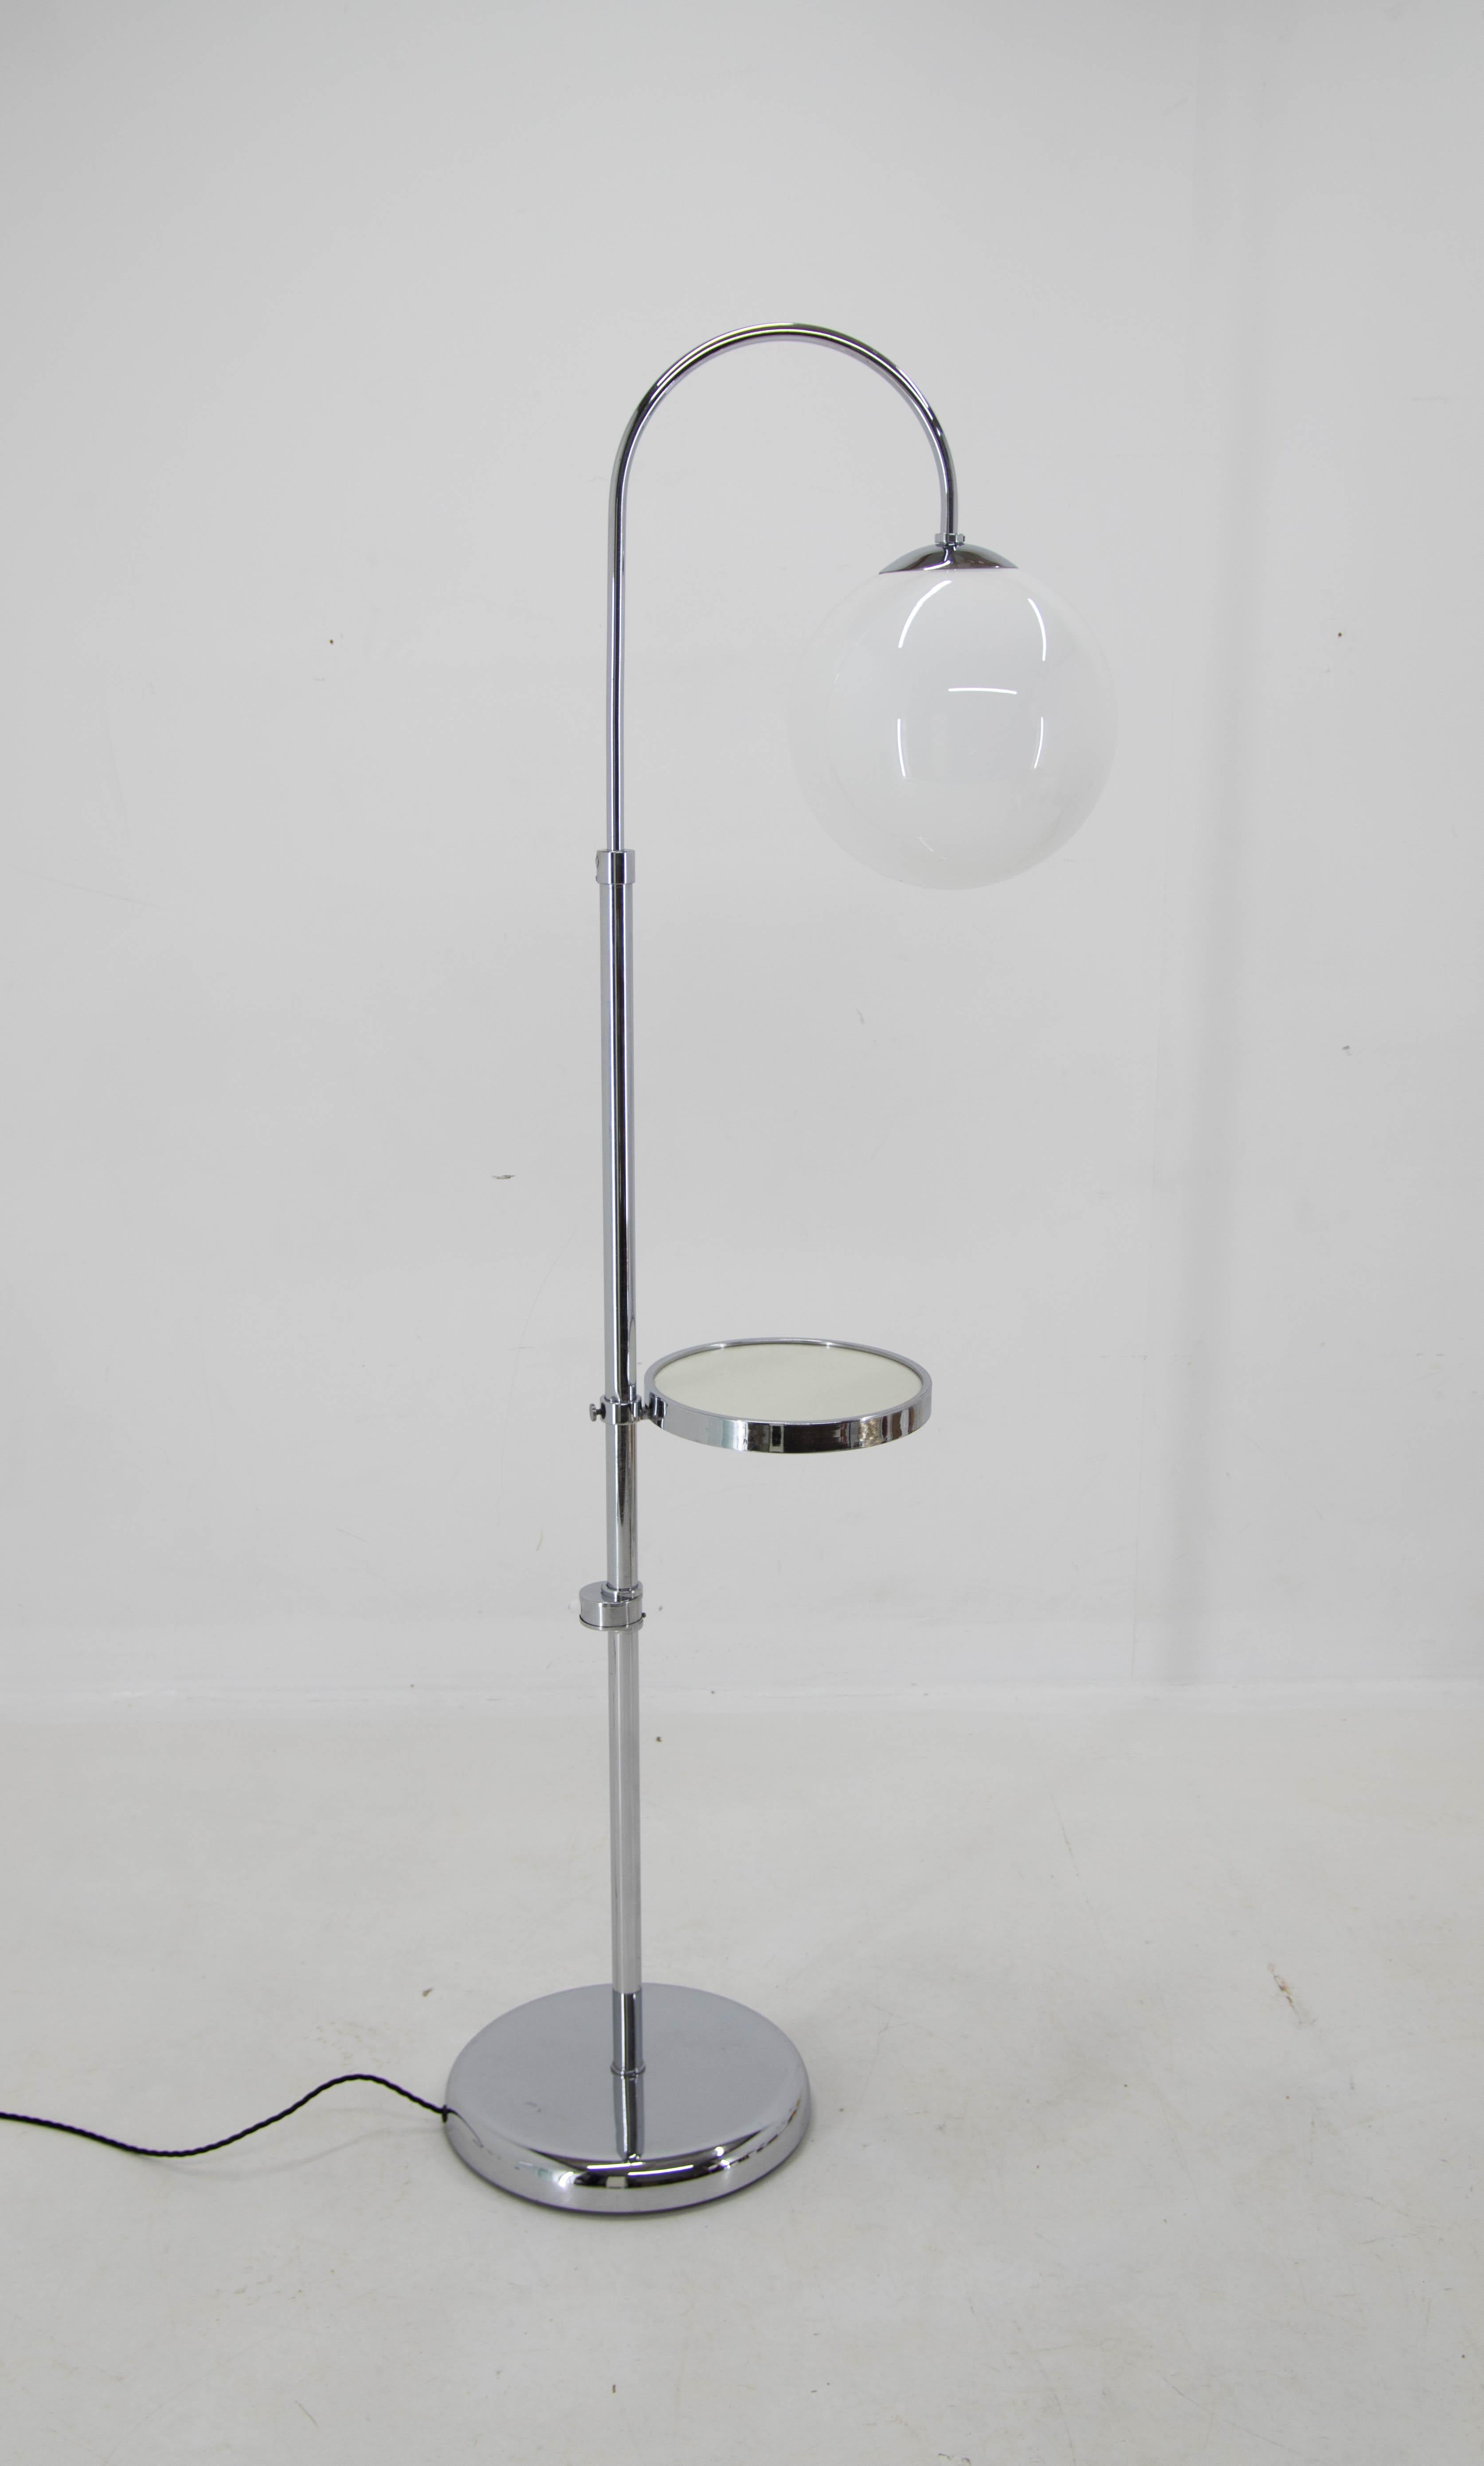 Art Deco / Functionalist floor lamp.
Restored: chrome with some scratches polished.
The table is fixed at a height of 78 cm - it is no longer movable.
The height of a lamp is no longer adjustable - fixed with a screw.
Rewired: 1x100W, E25-E27